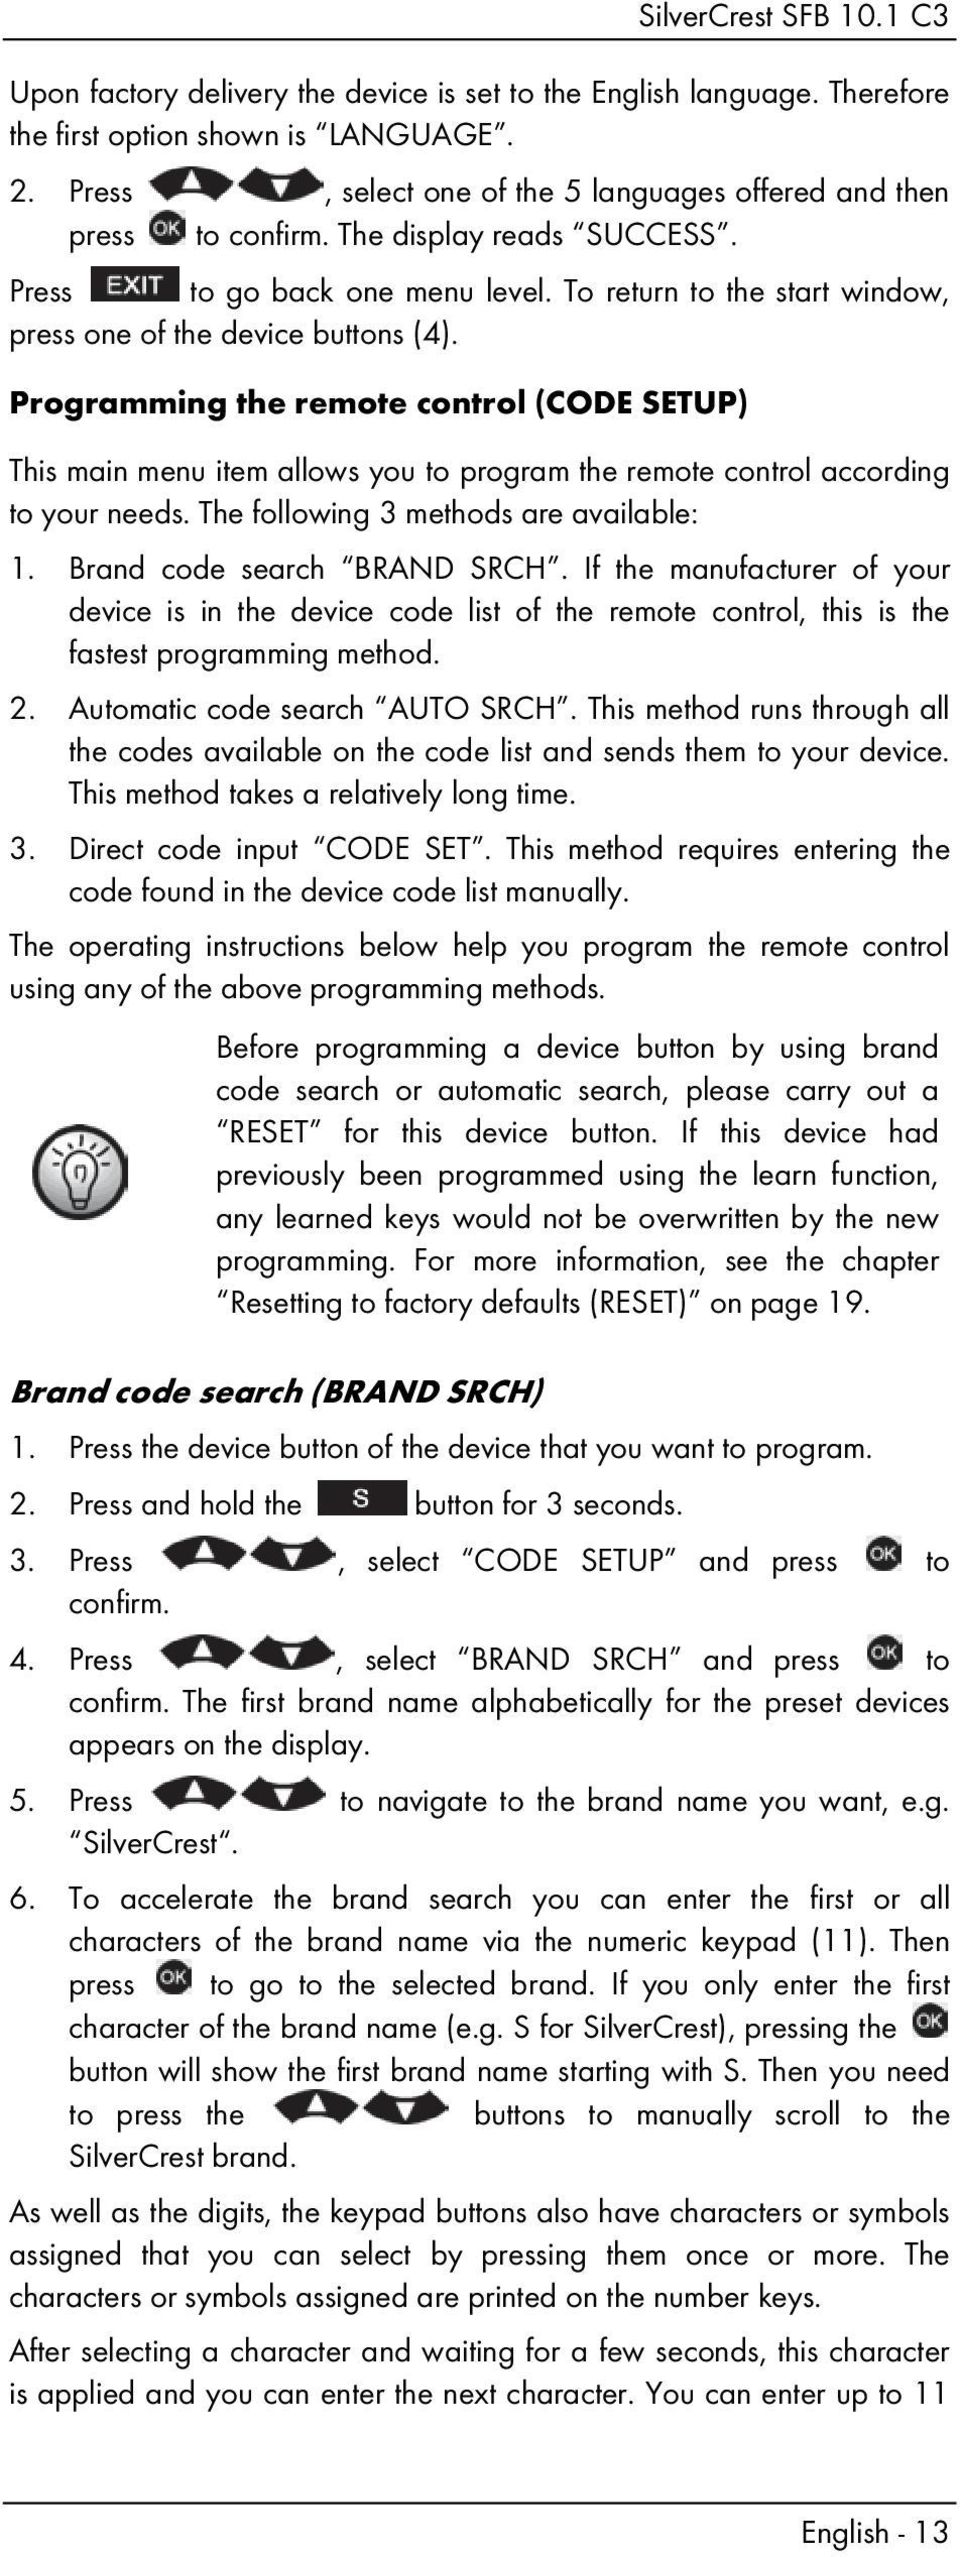 Programming the remote control (CODE SETUP) This main menu item allows you to program the remote control according to your needs. The following 3 methods are available: 1.